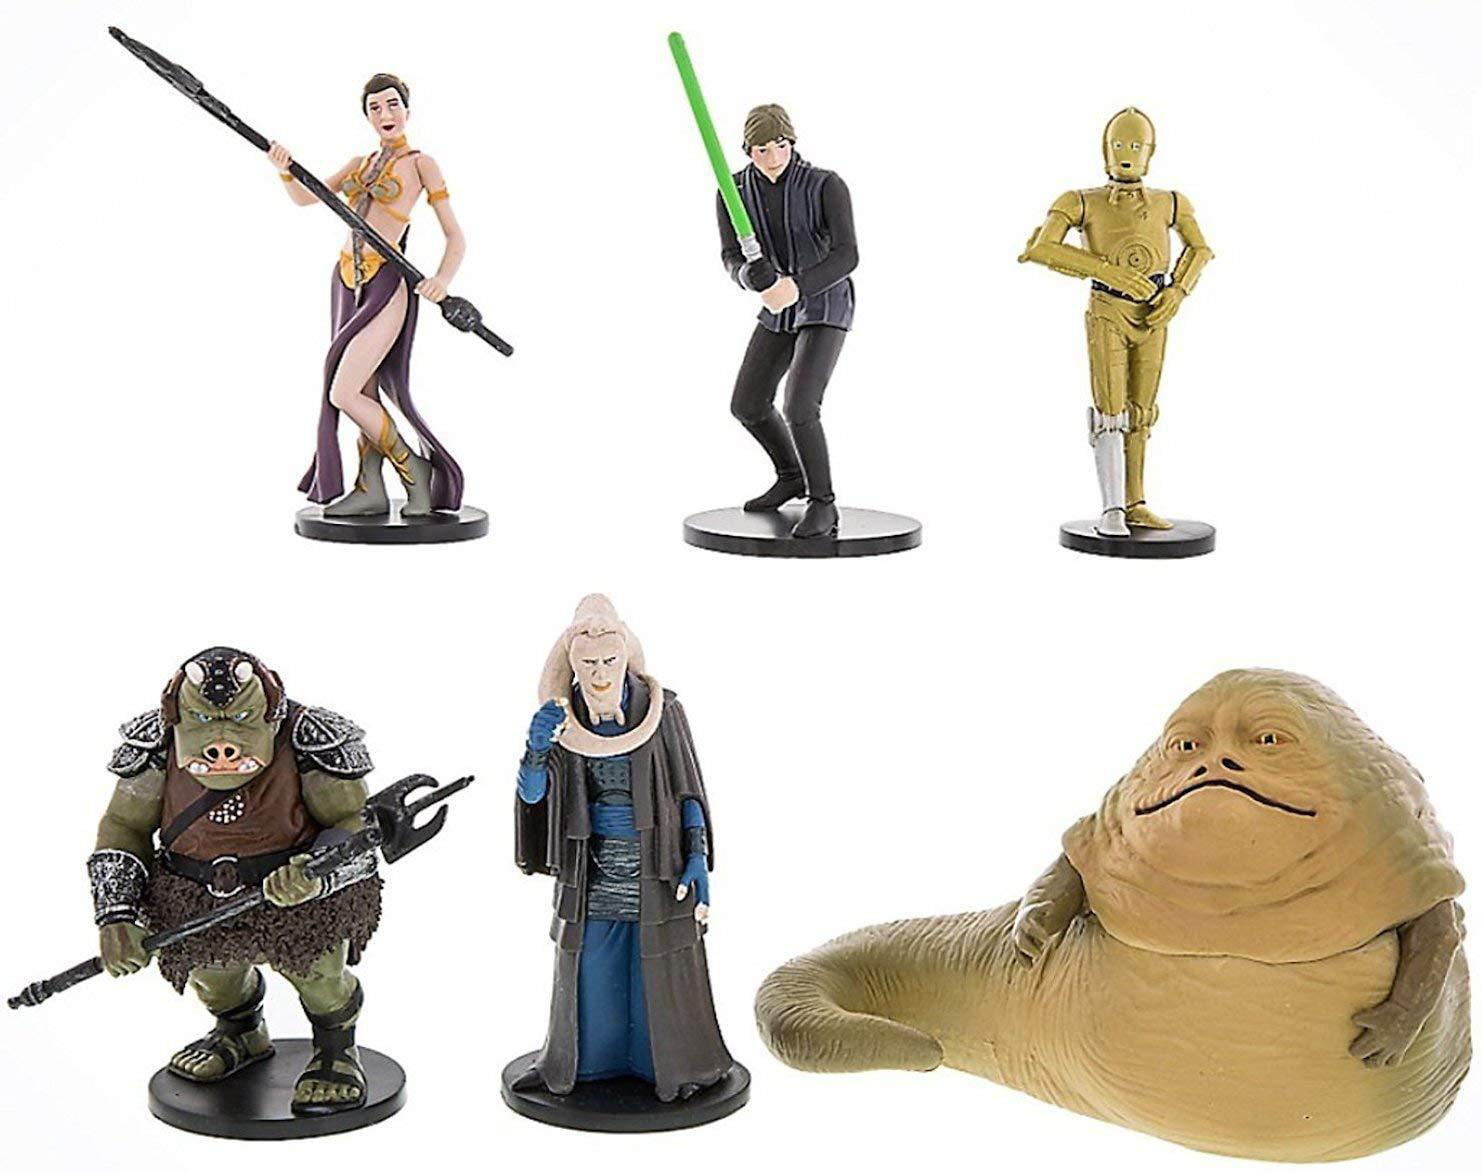 DISNEY PARKS STAR WARS RETURN OF THE JEDI Collectible Figures 